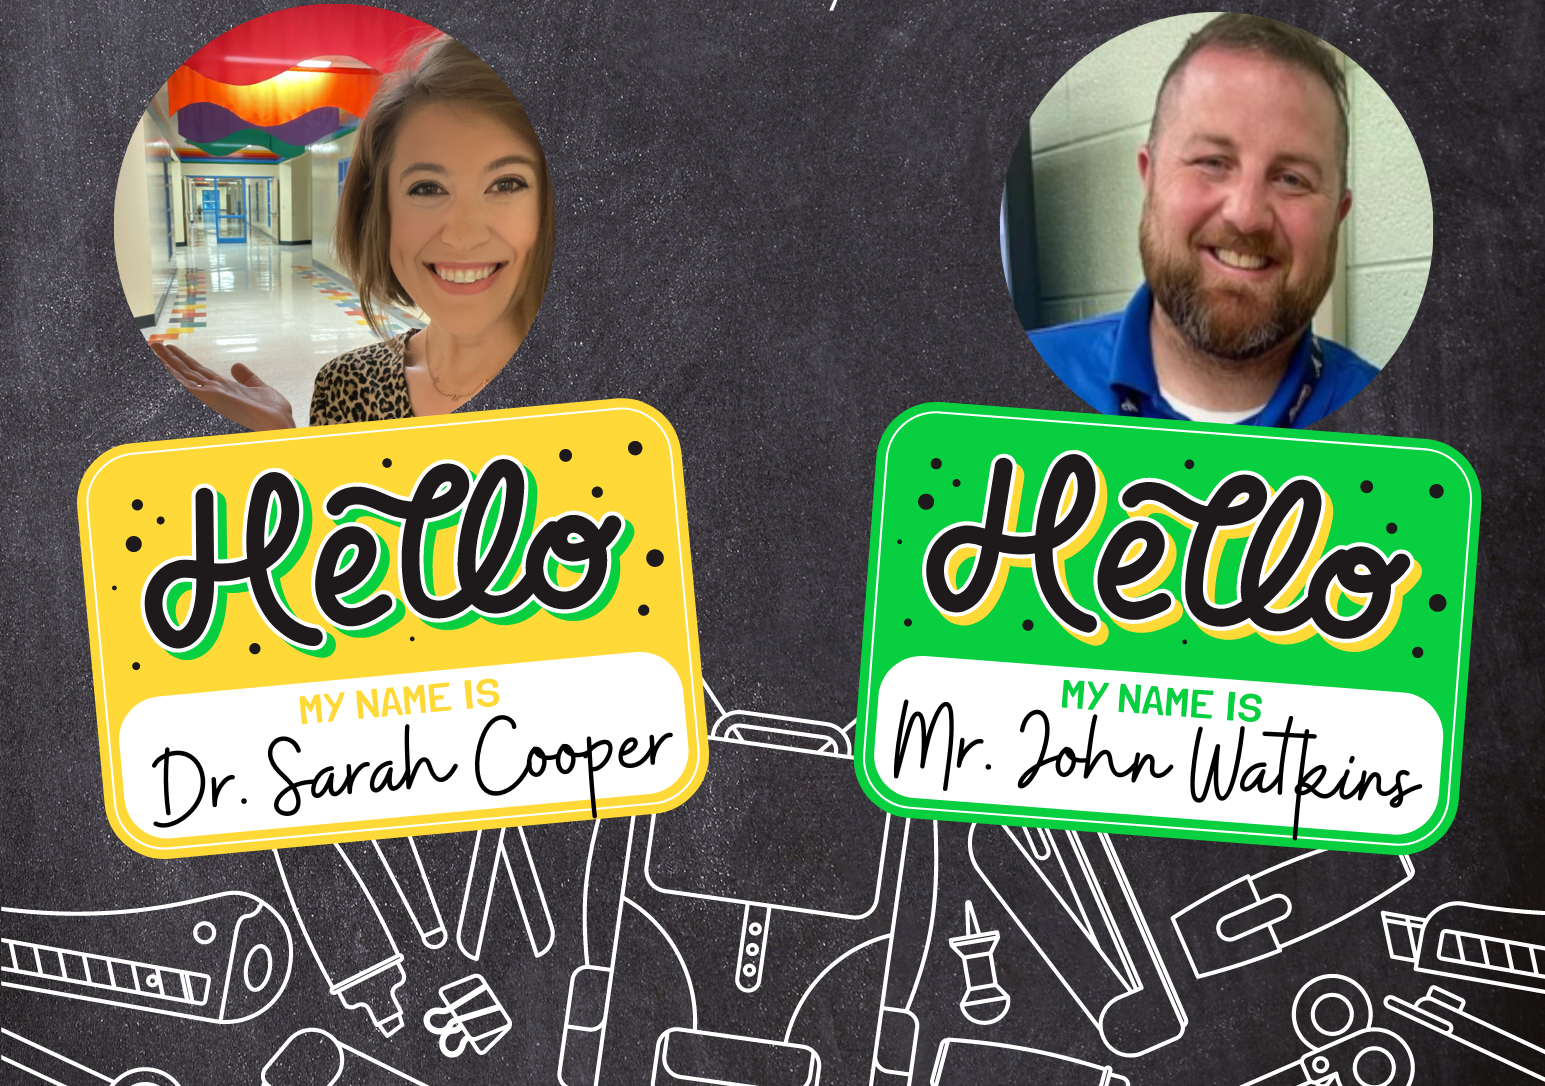 Welcome to the Russellville Hornet Website!! Meet our new Administrators!